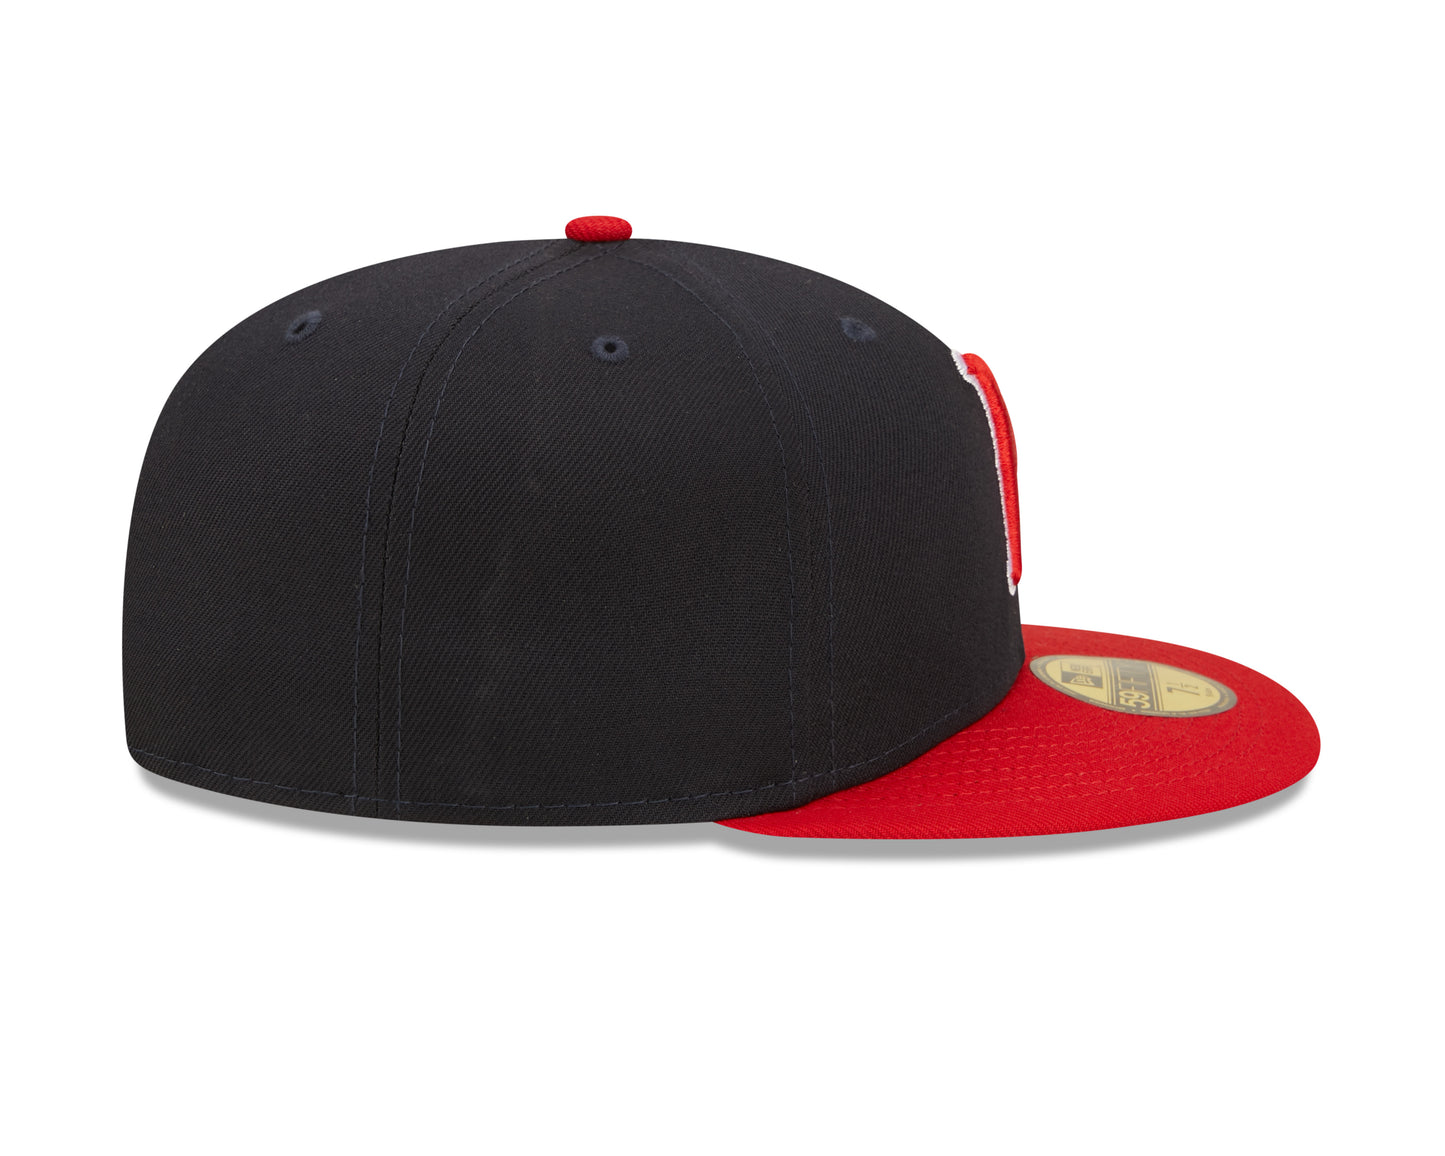 New Era - 59fifty Fitted - MiLB - AC Perf - Nashville Sounds - Navy/Red - Headz Up 